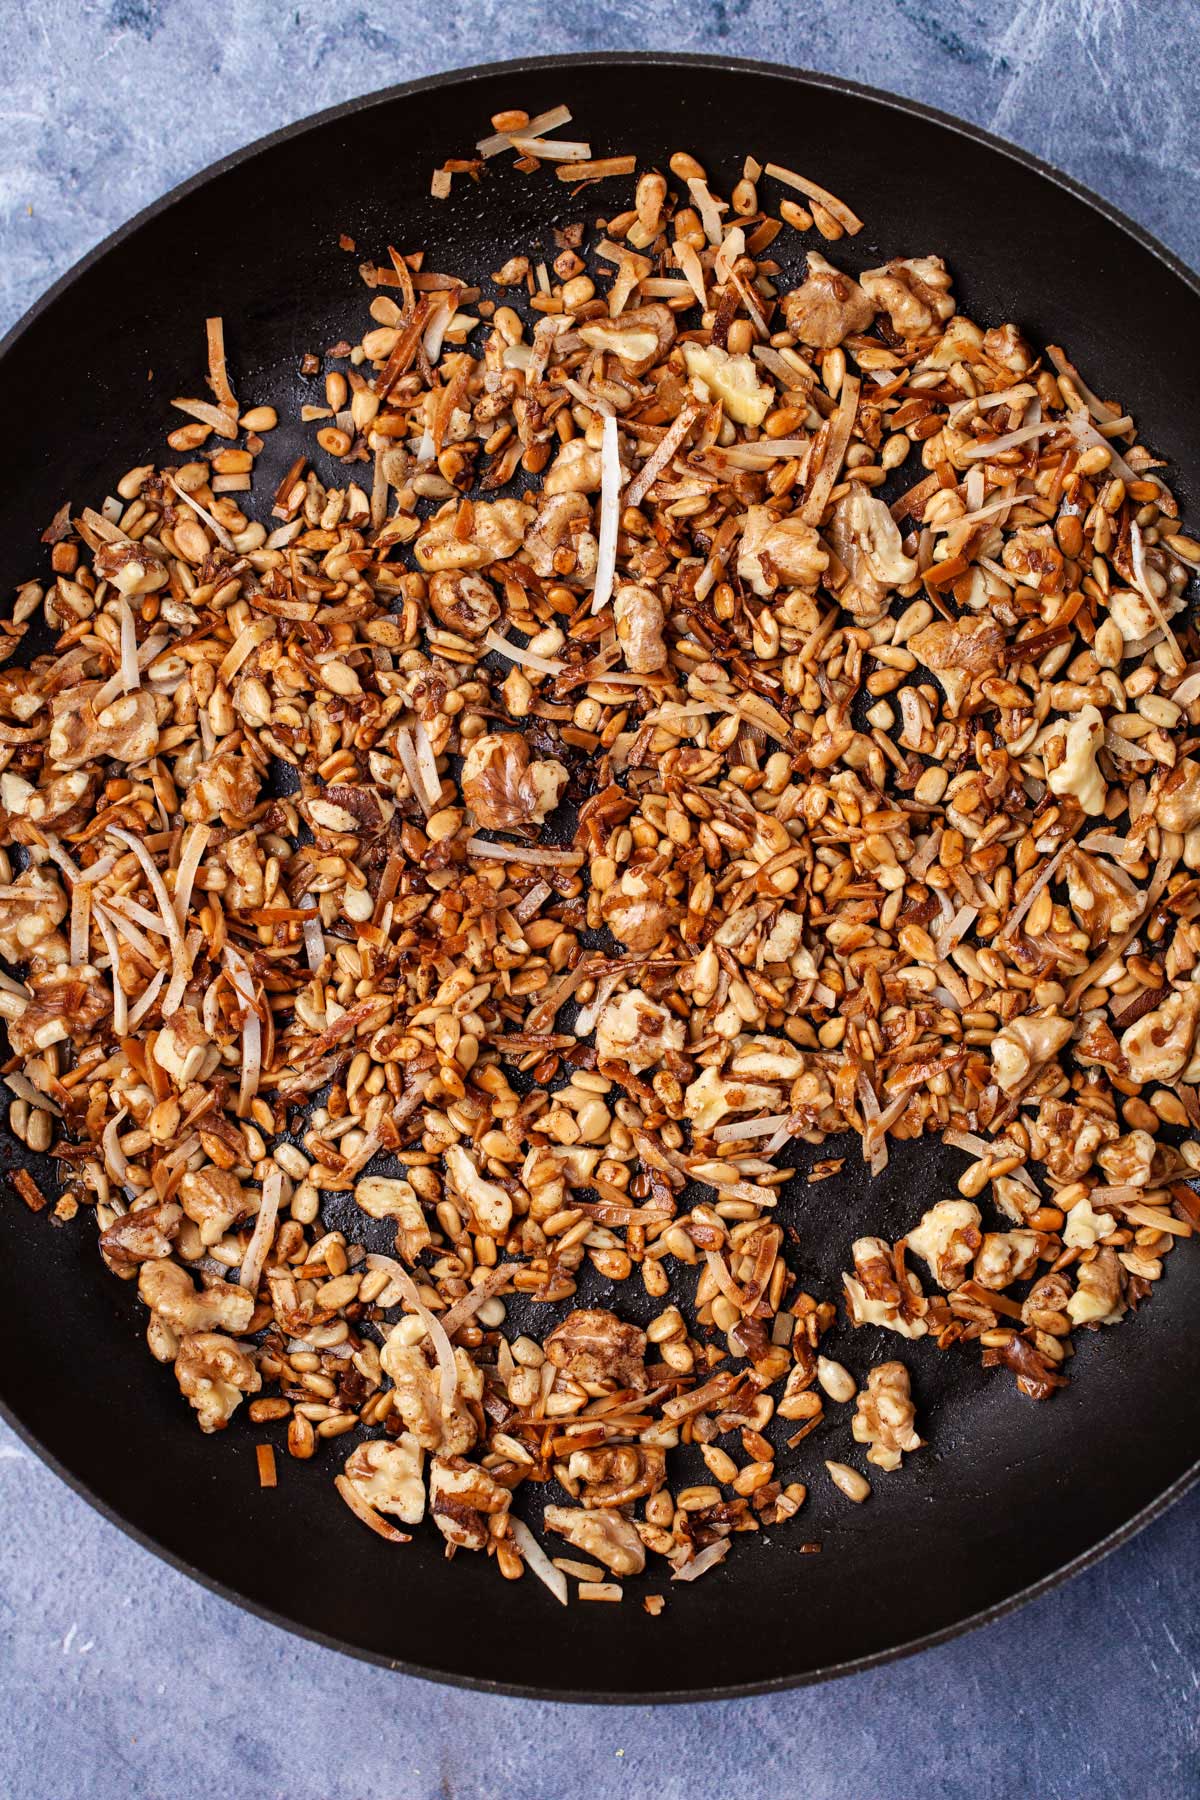 Toasted nuts, seeds, and coconut shreds in a skillet.